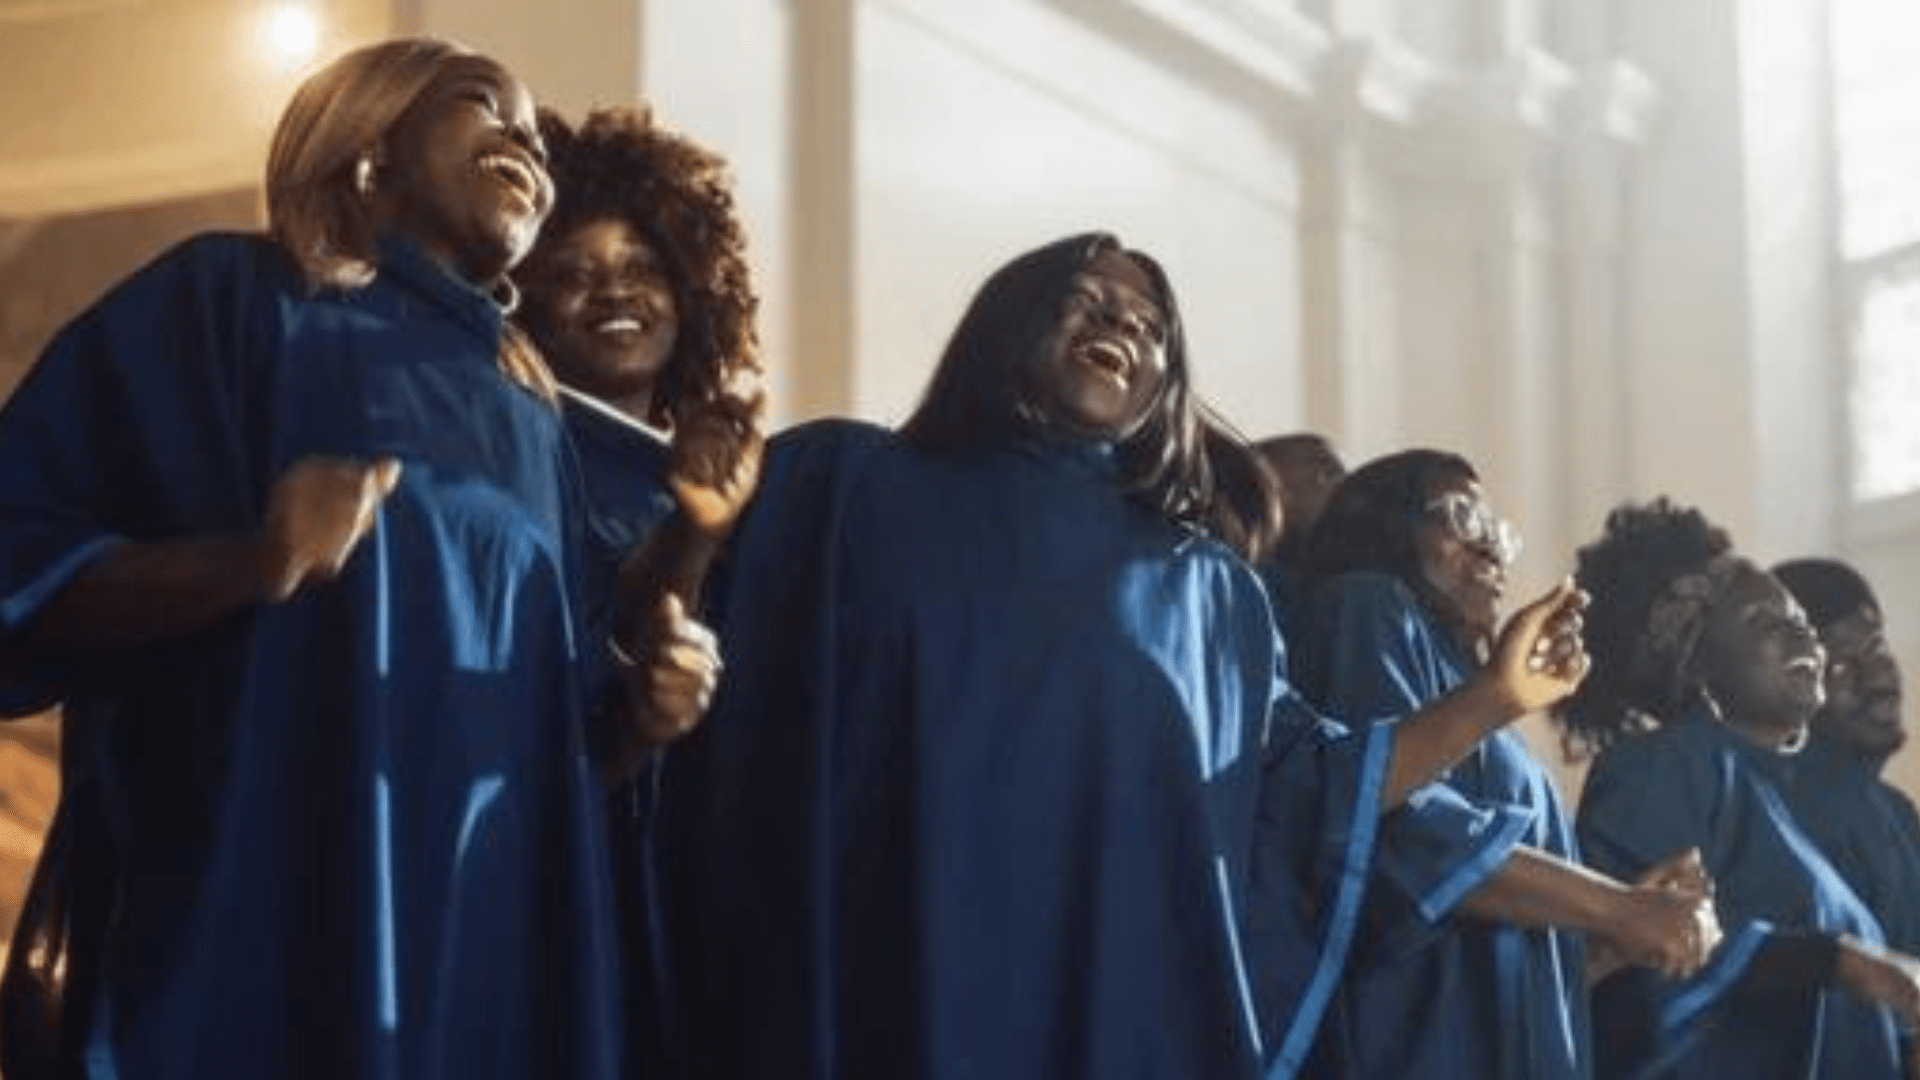 Gospel Choir Competition to be Featured at Health Symposium in Jackson